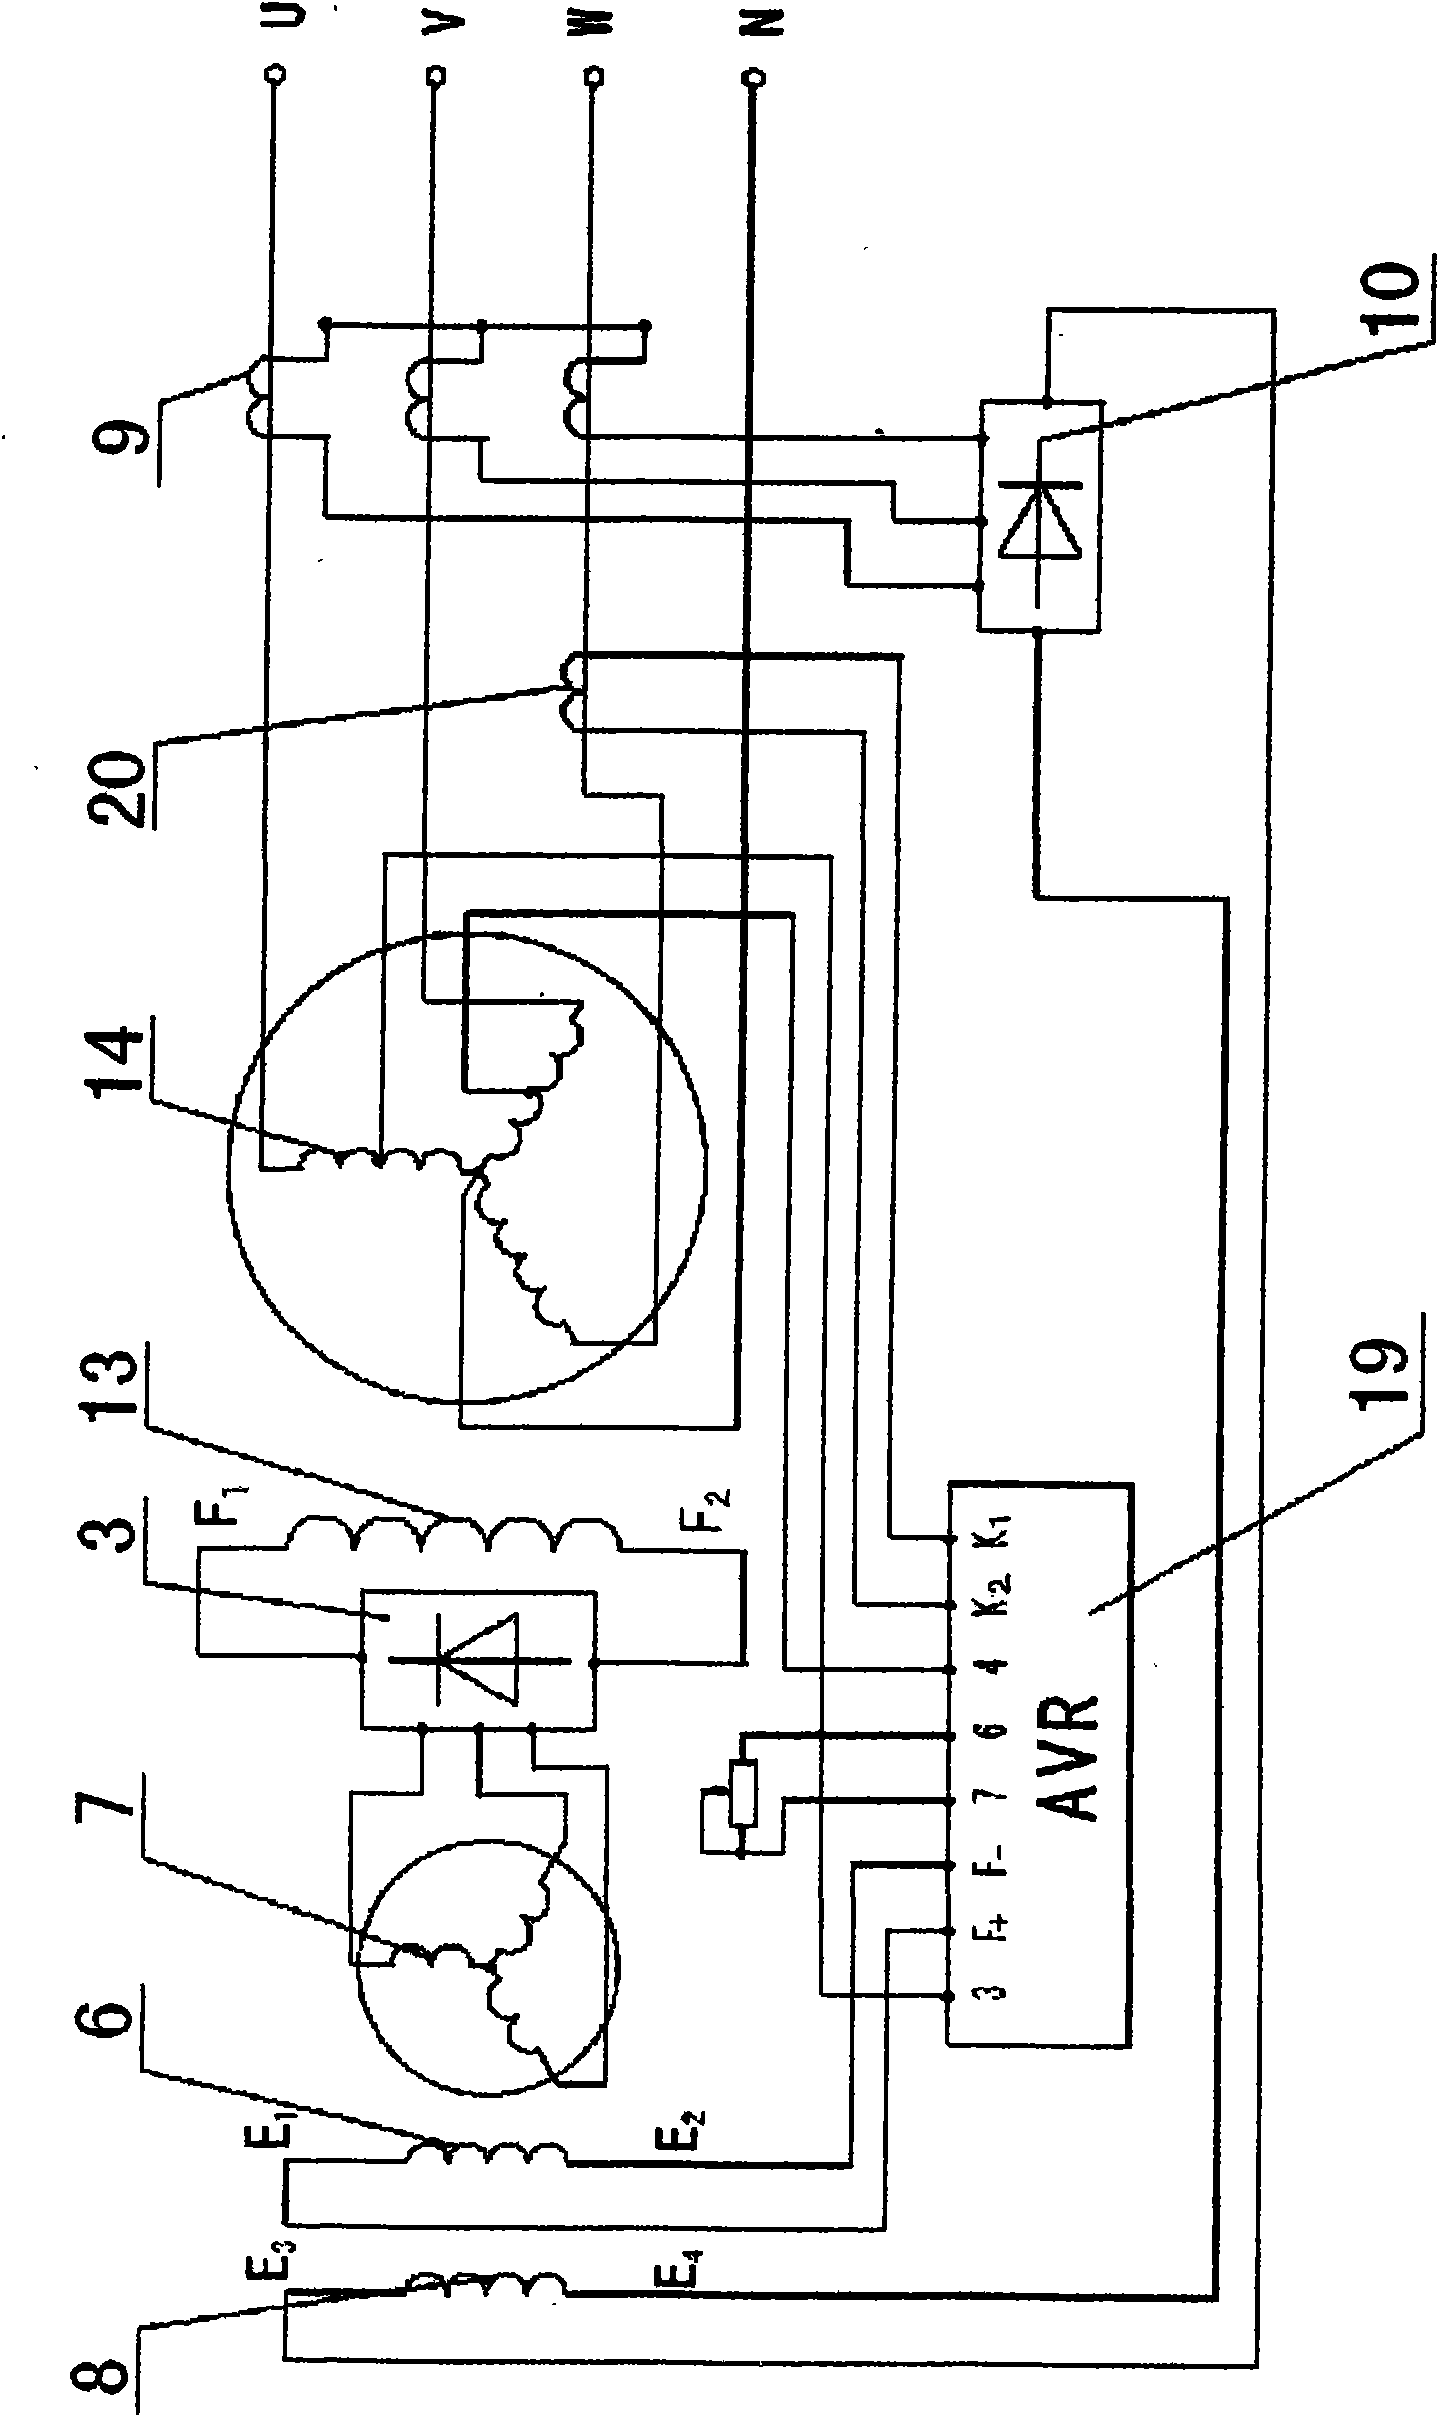 Overall salient type intermediate-frequency brushless excitation synchronous generator